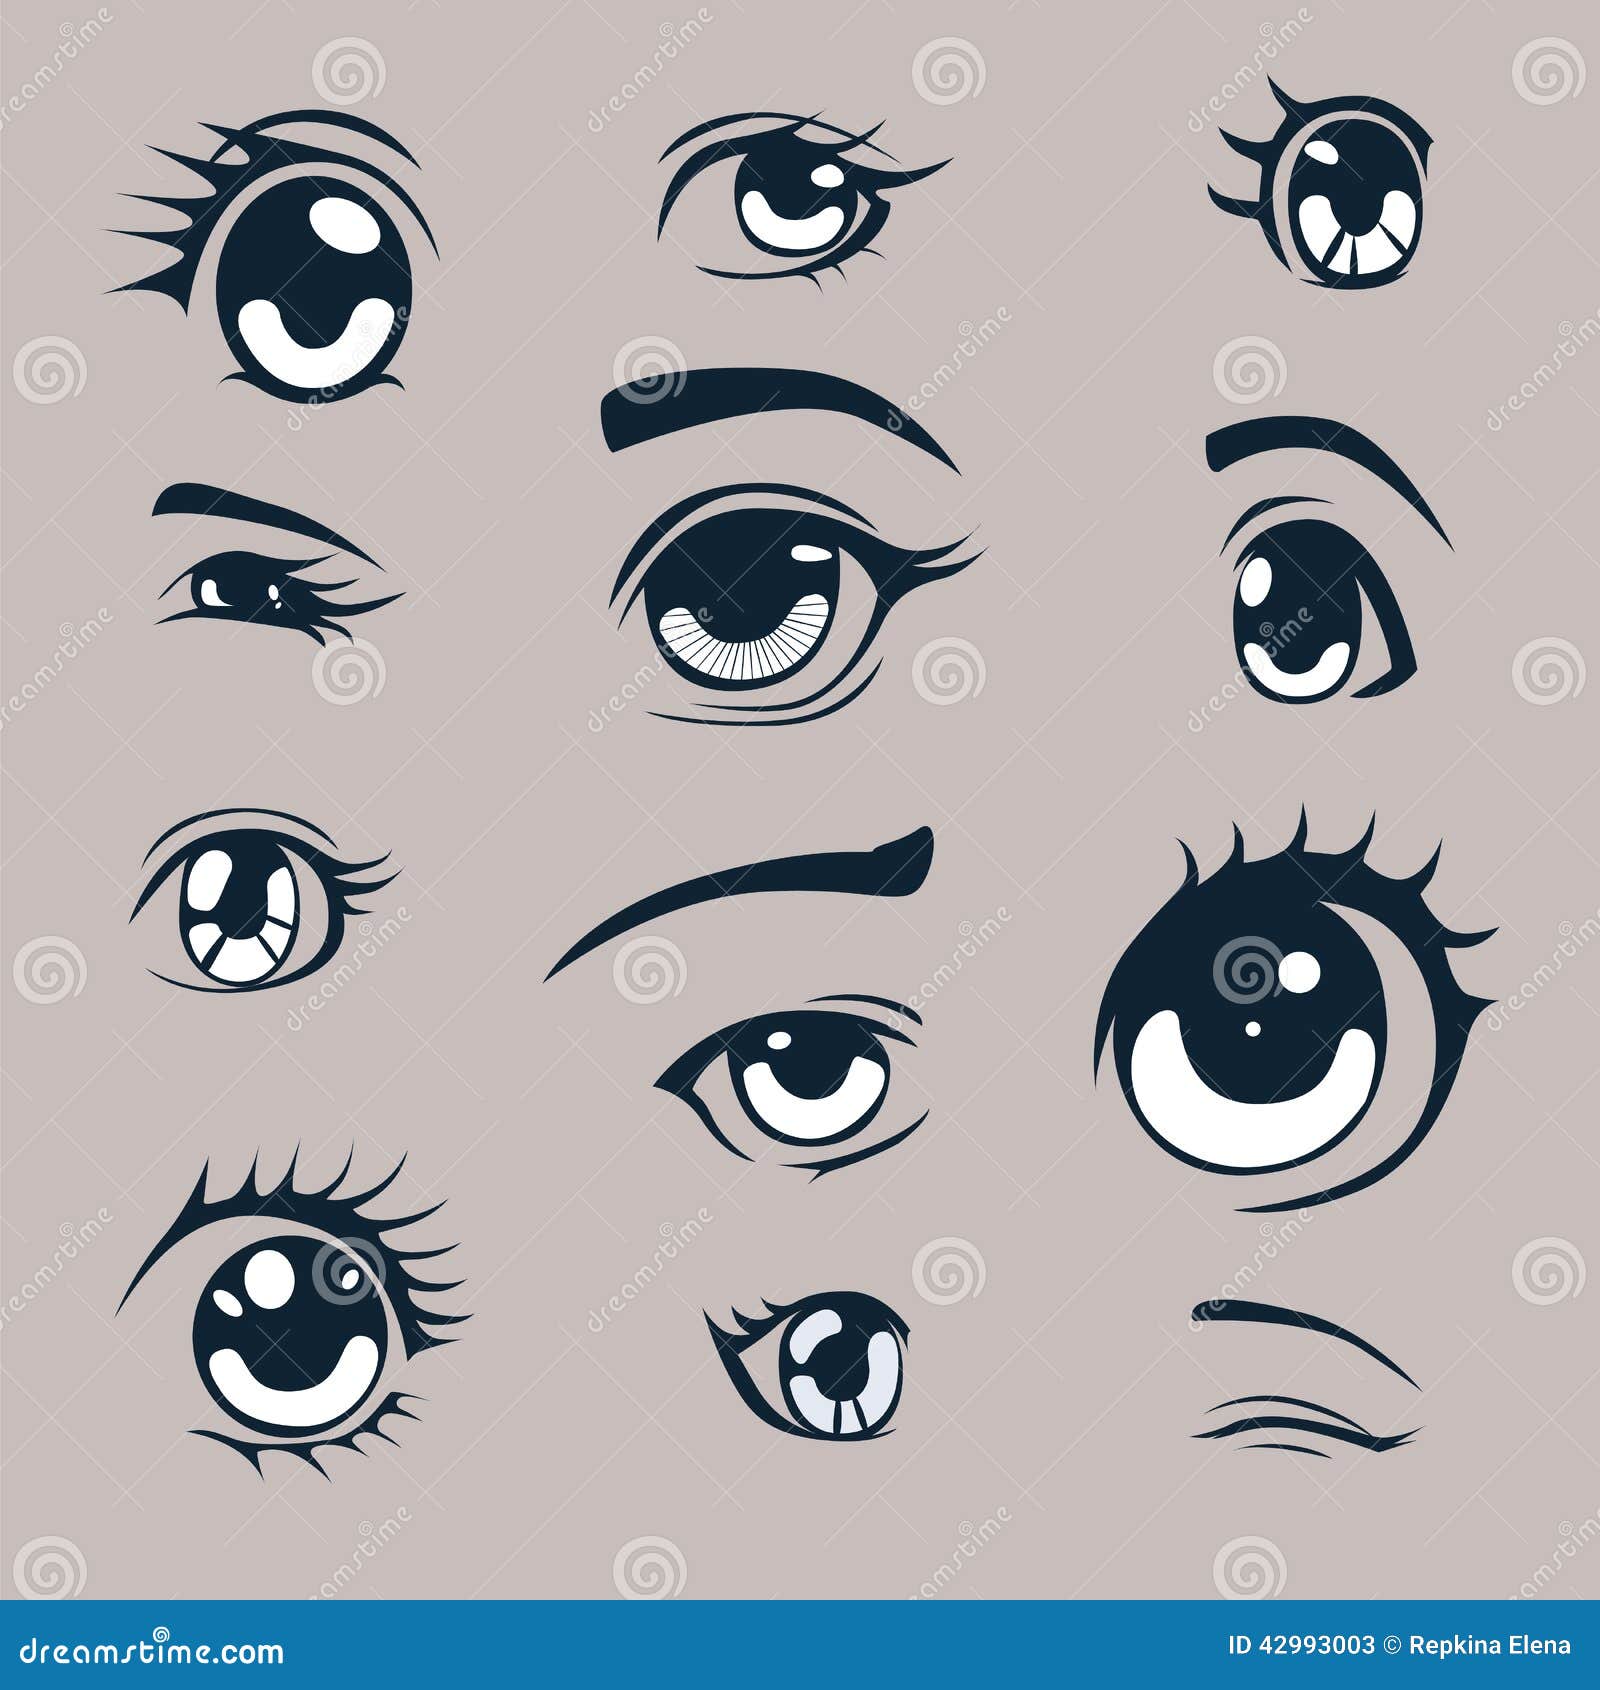 Group Of Young People Faces Anime Style Characters Stock Illustration   Download Image Now  Manga Style Eye Cartoon  iStock